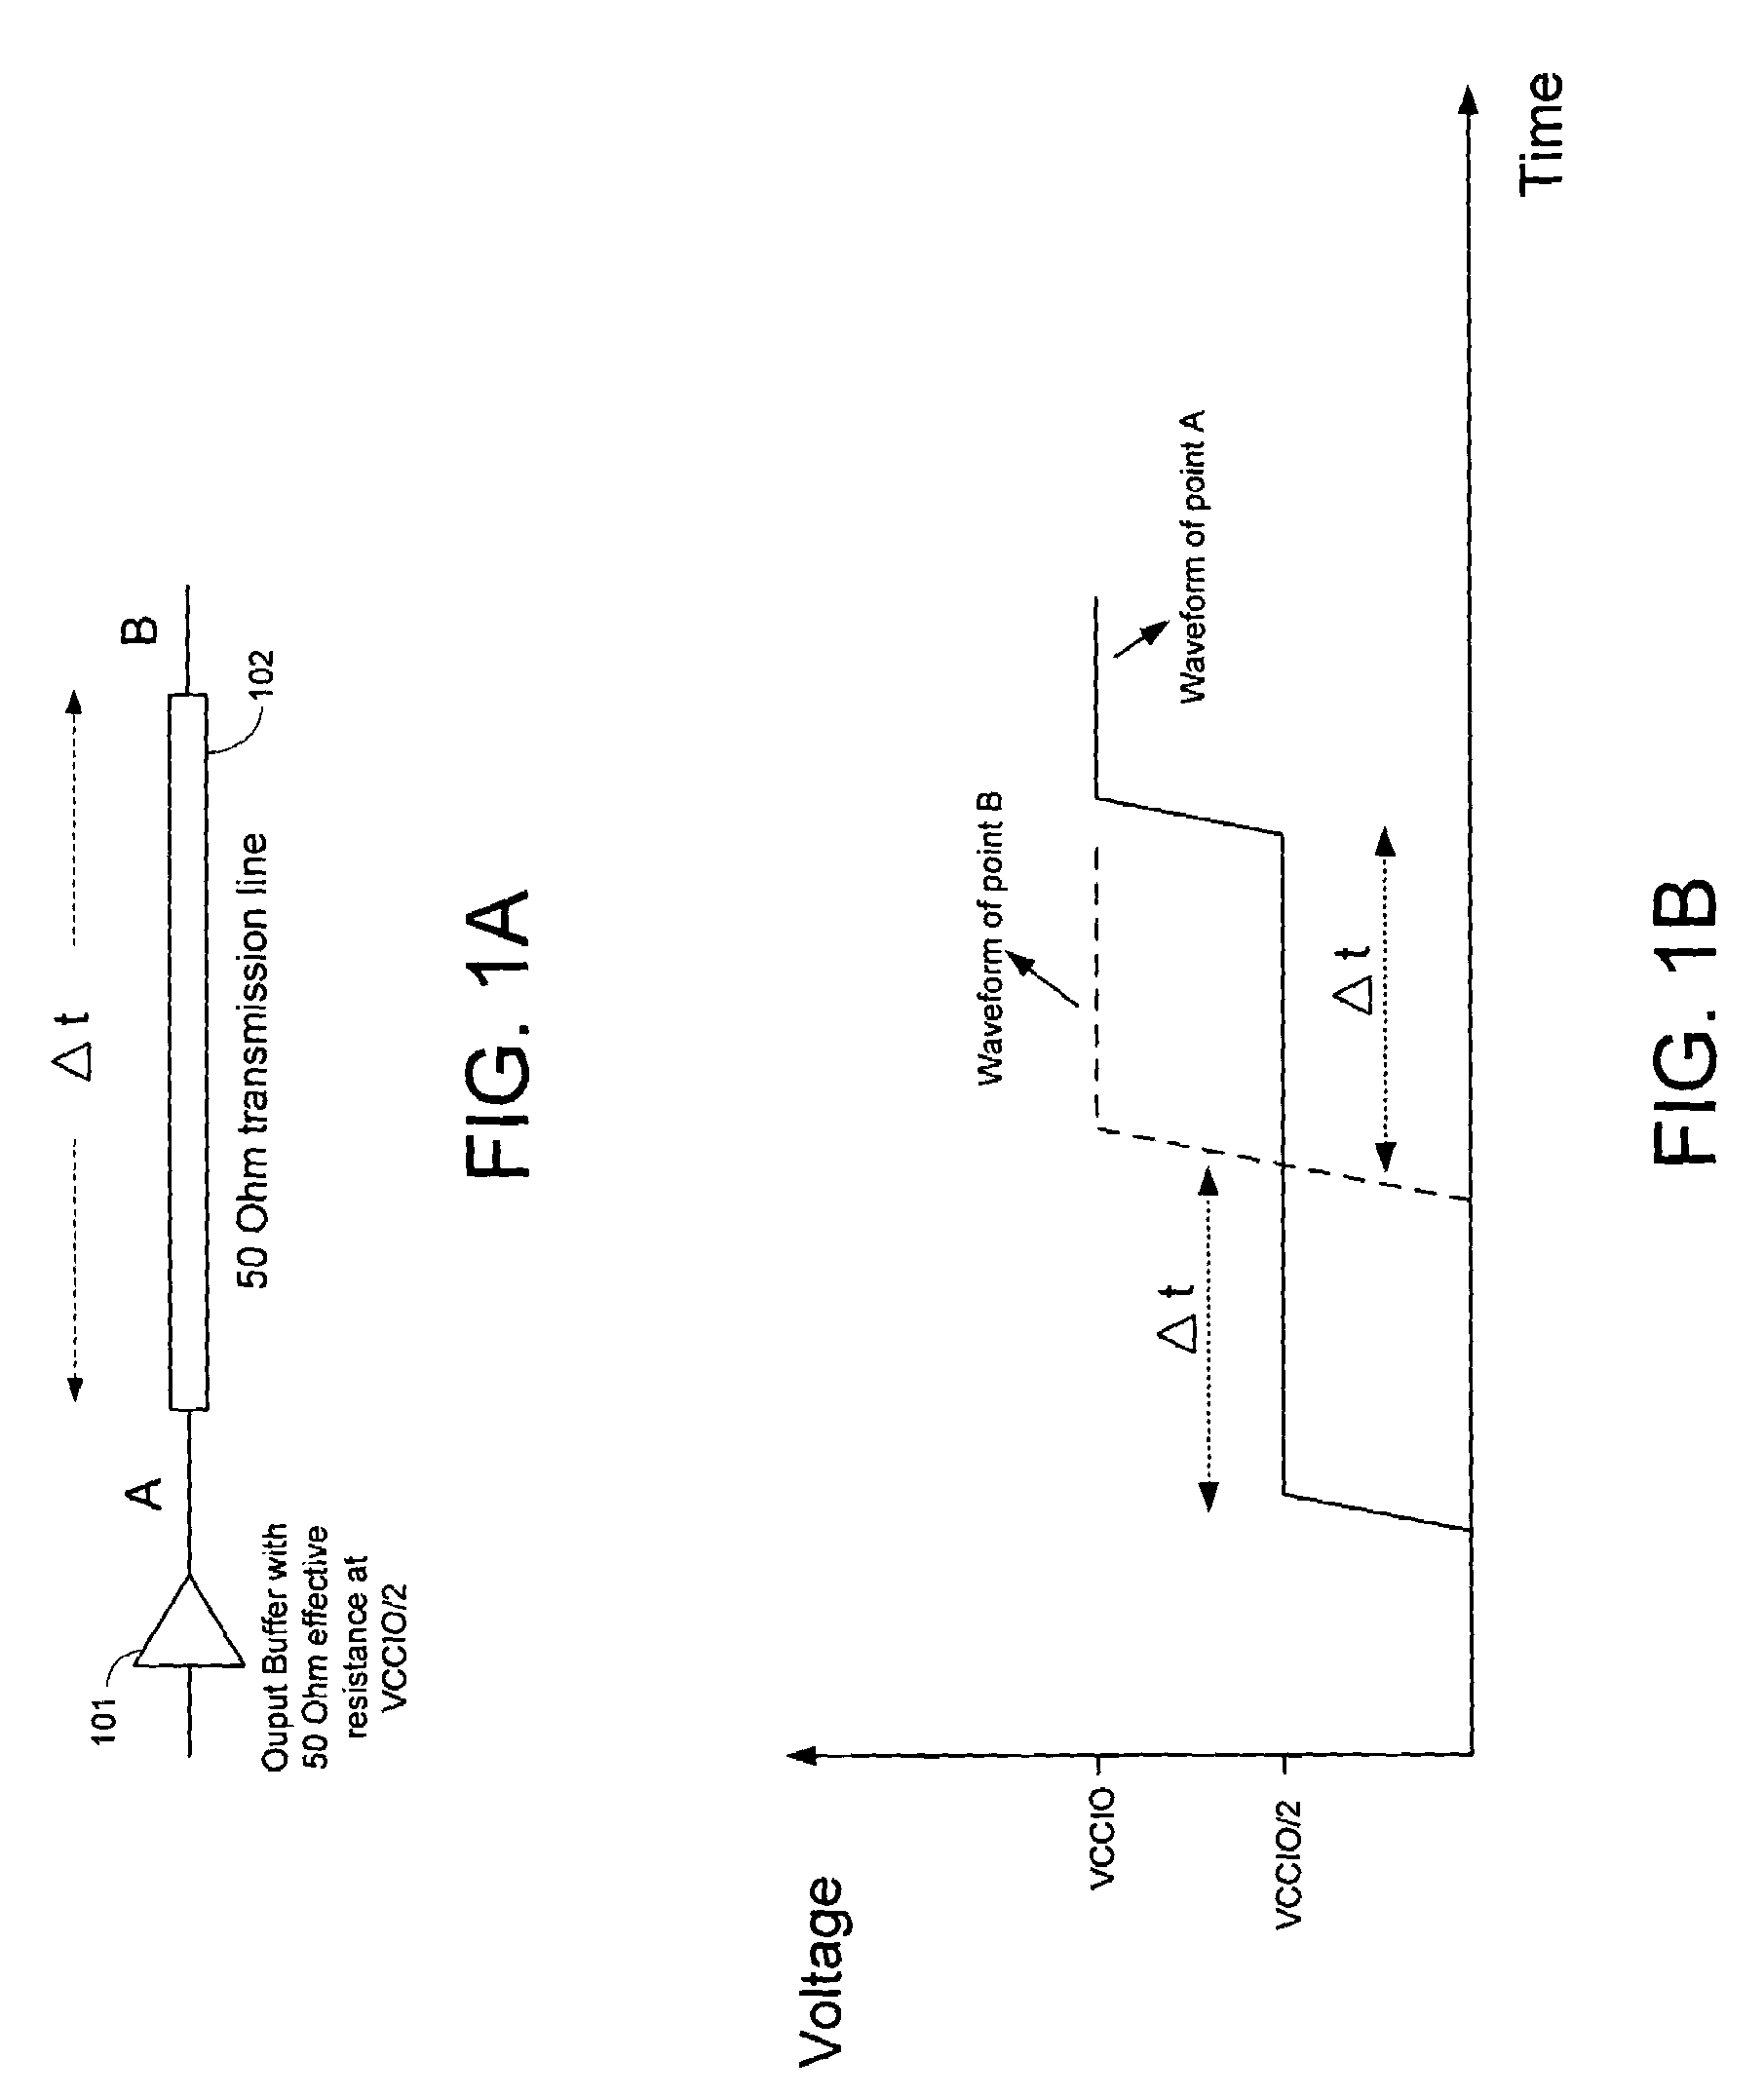 Techniques for controlling on-chip termination resistance using voltage range detection